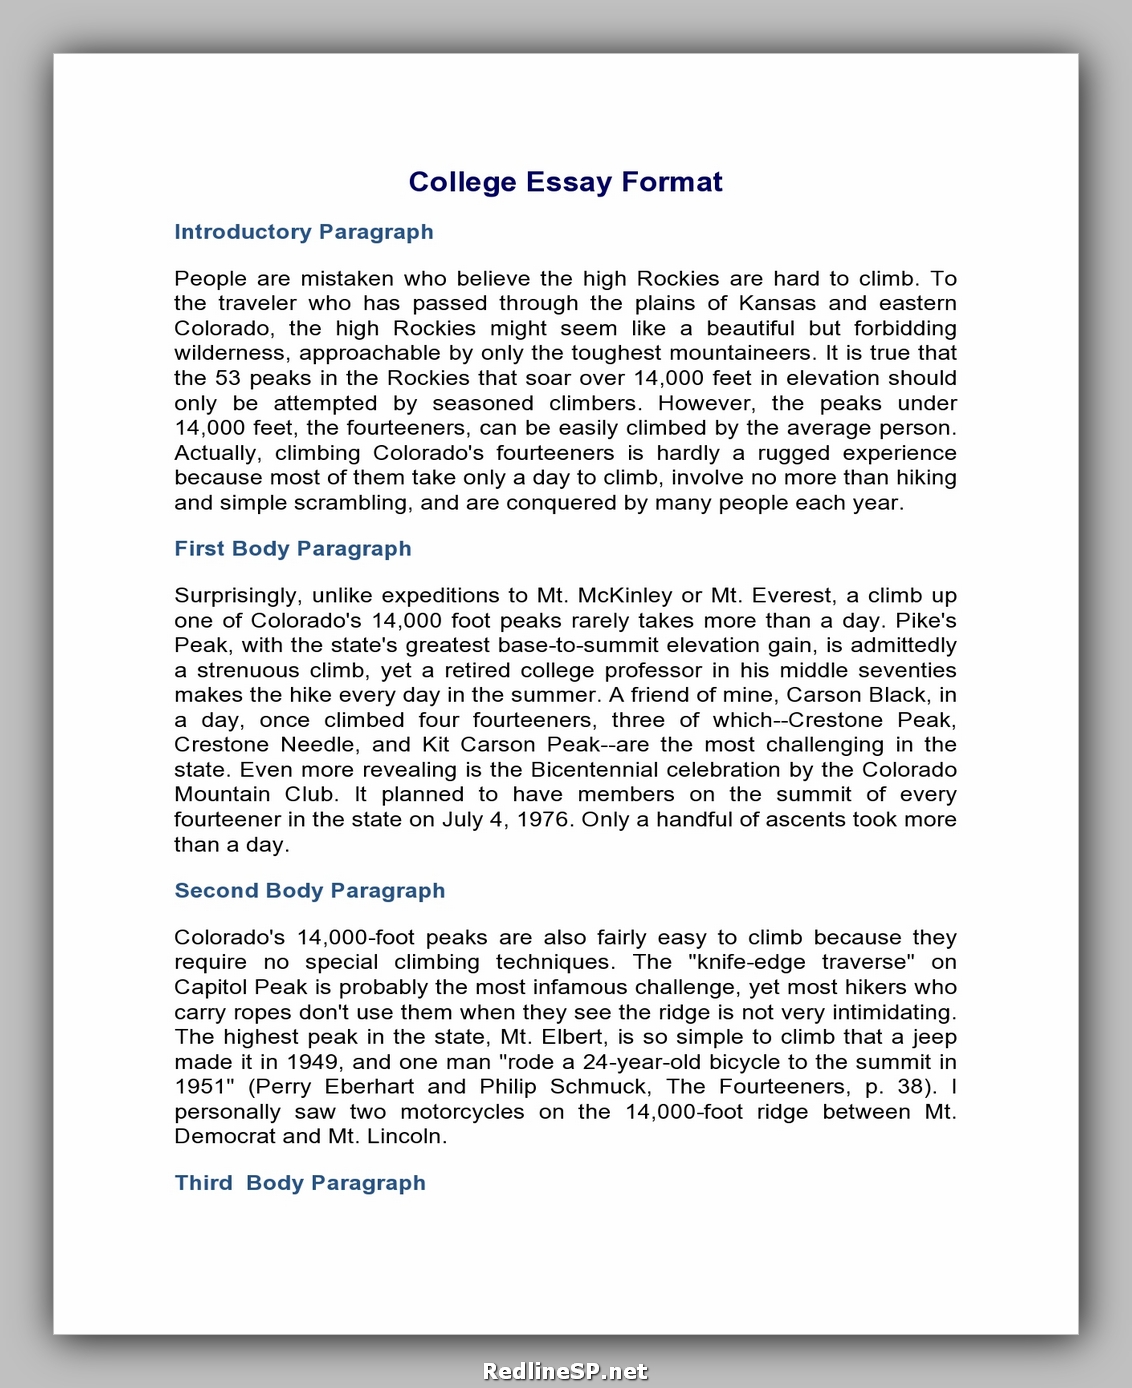 examples of college essays that worked